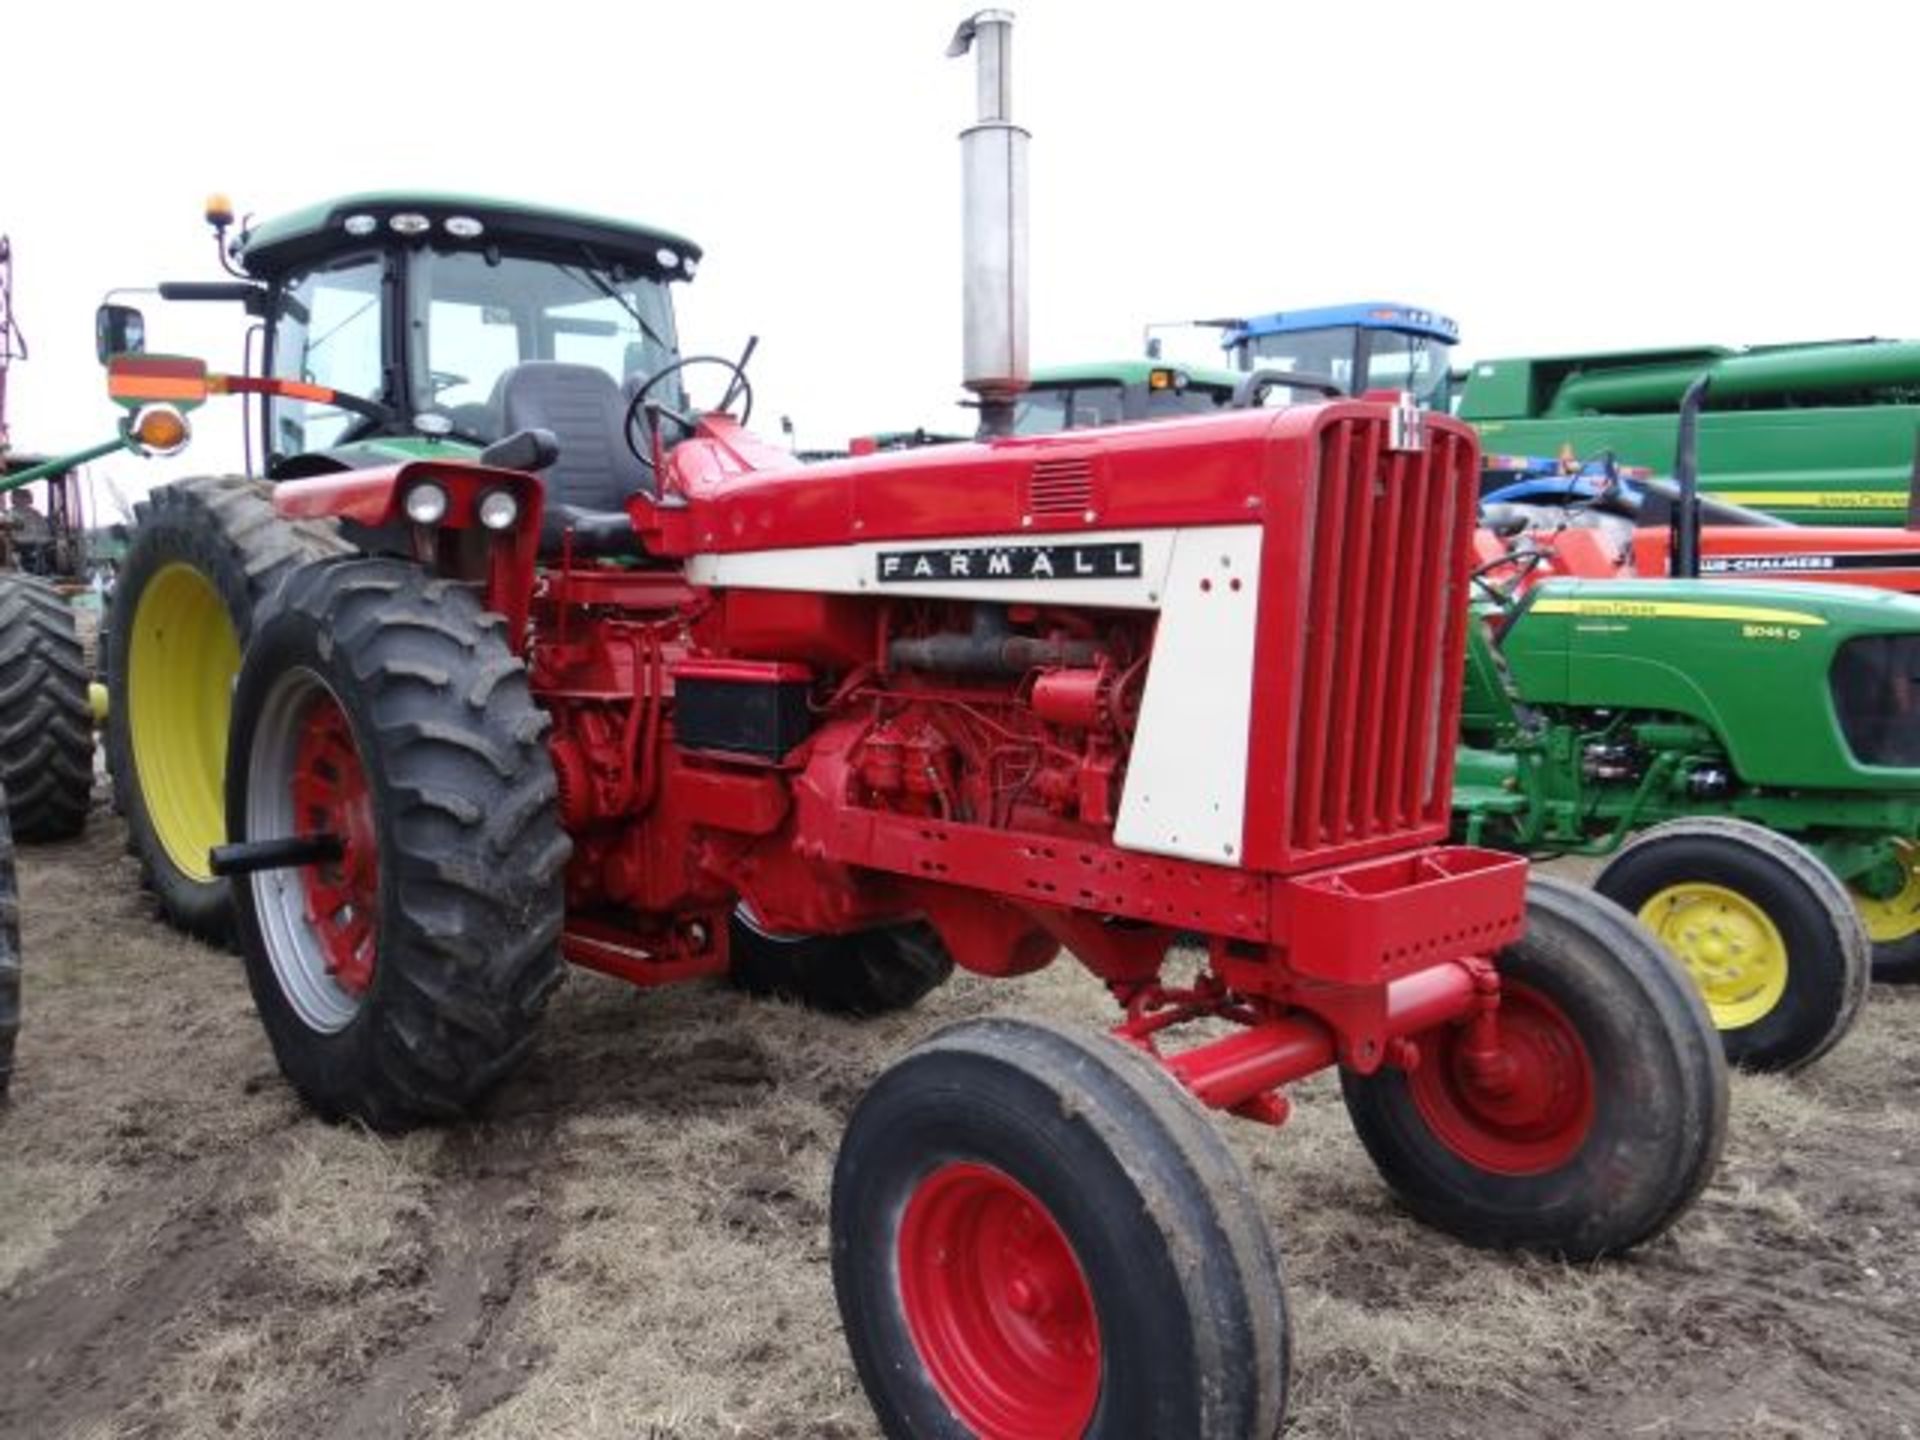 Lot # 1326 Farmall 806 Tractor, 1966 One Owner, New Injectors, Torque, Hyd Pump in Dec 2014, Sold - Image 2 of 4